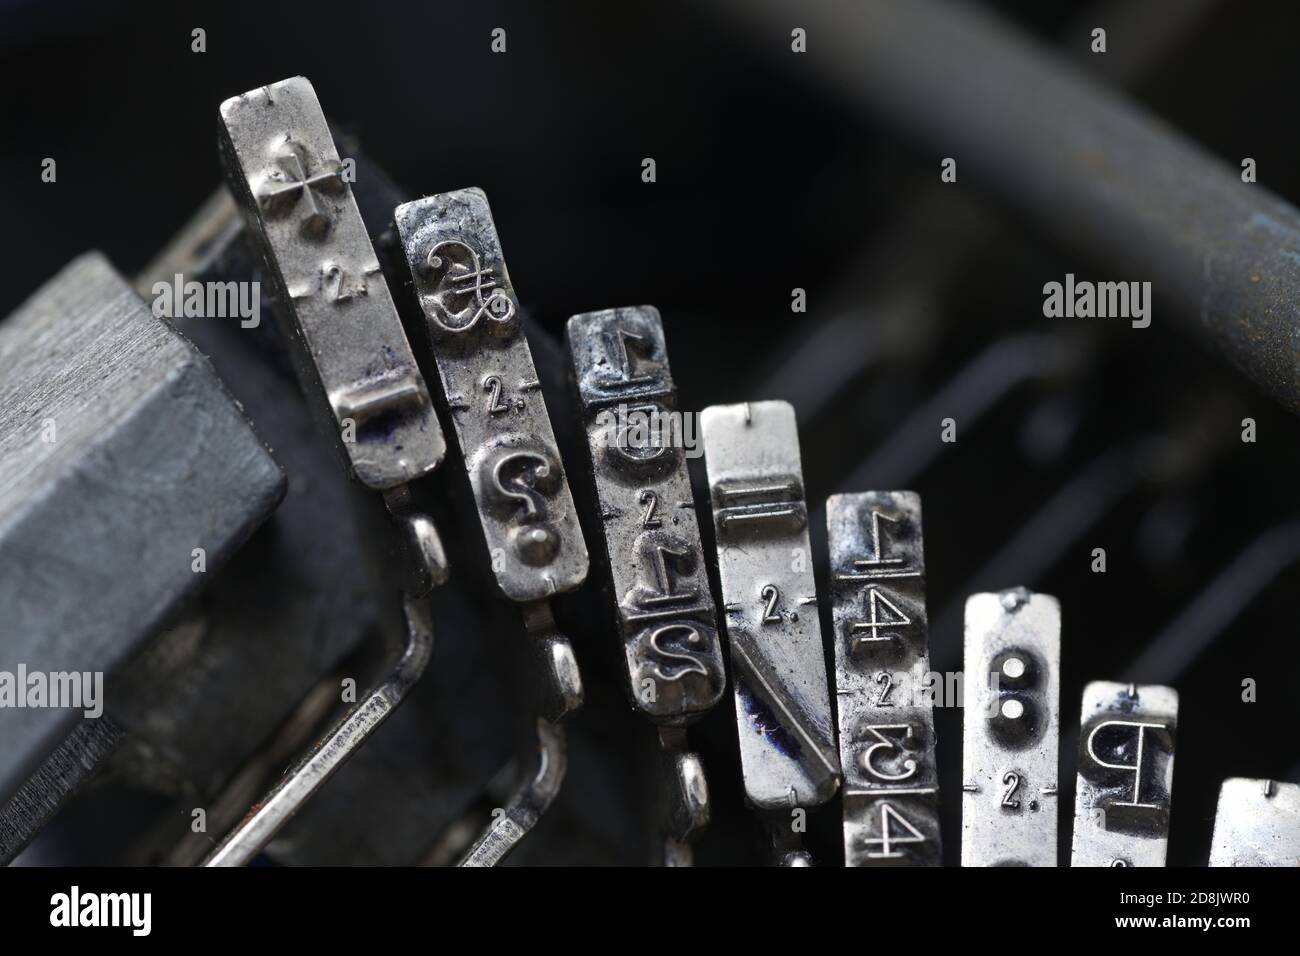 details of typewriter hammers showing symbols of a one third fraction, pound sign, question mark, addition and subtraction signs Stock Photo